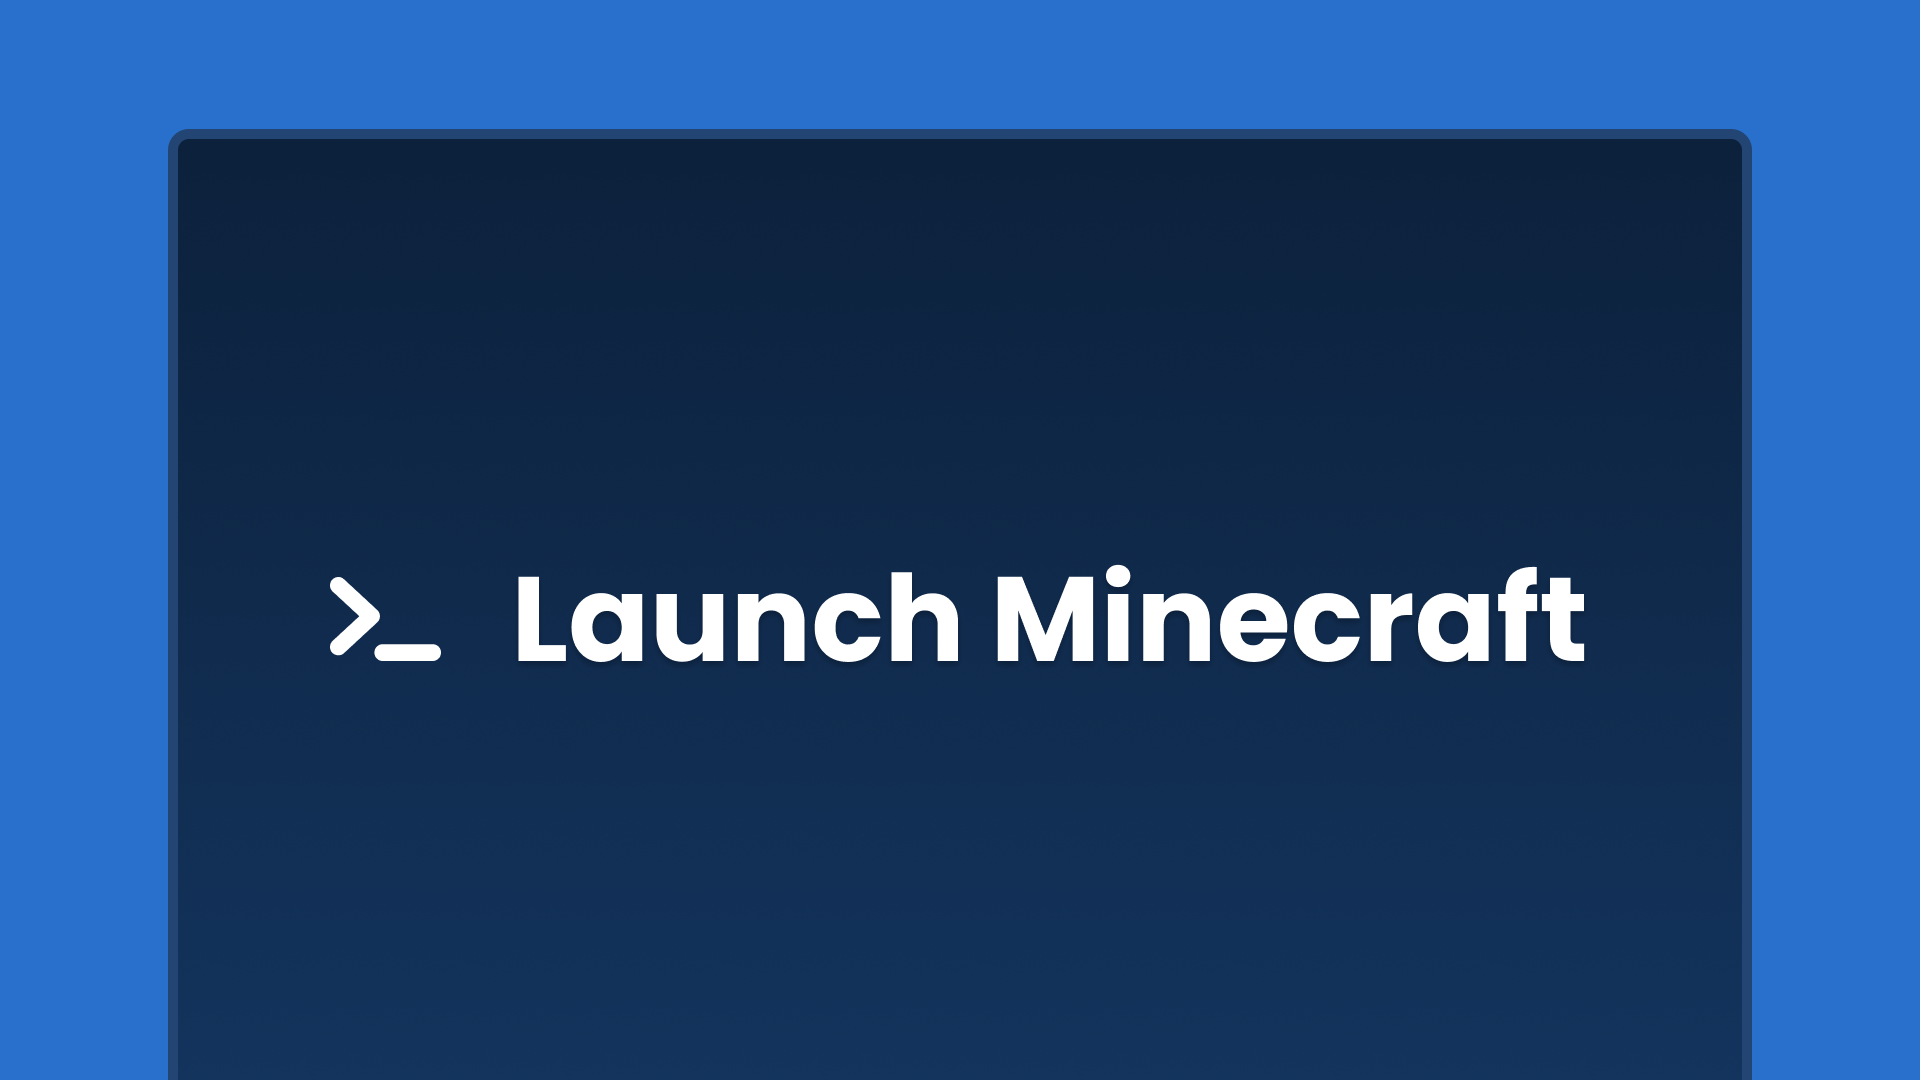 Console Minecraft Launcher, Just Launch It!